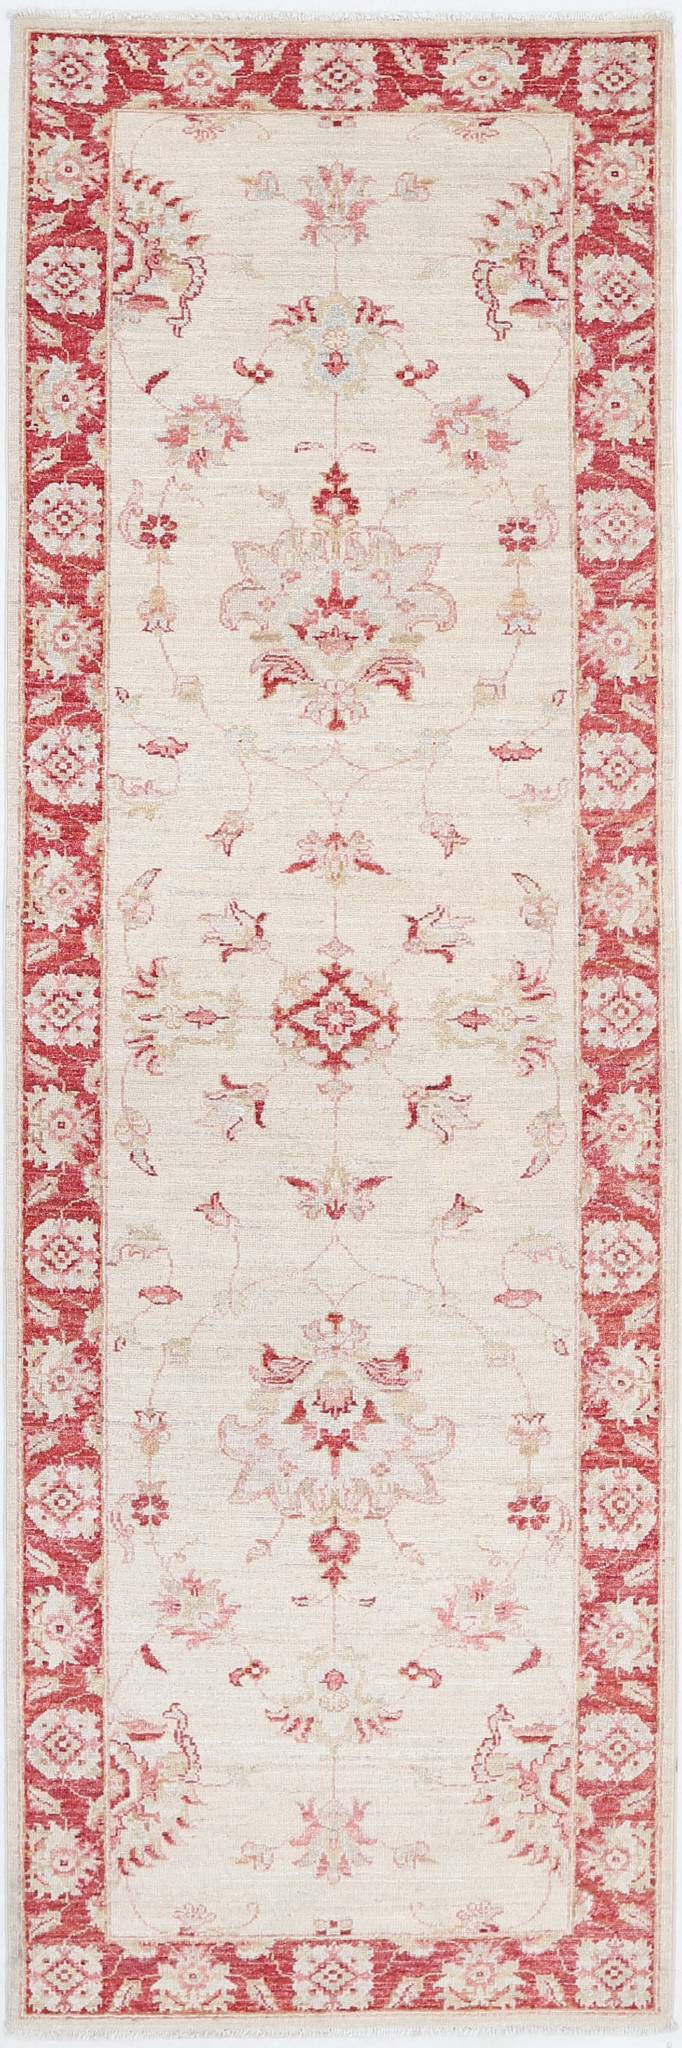 Traditional Hand Knotted Ziegler Farhan Wool Rug of Size 2'7'' X 8'2'' in Ivory and Red Colors - Made in Afghanistan